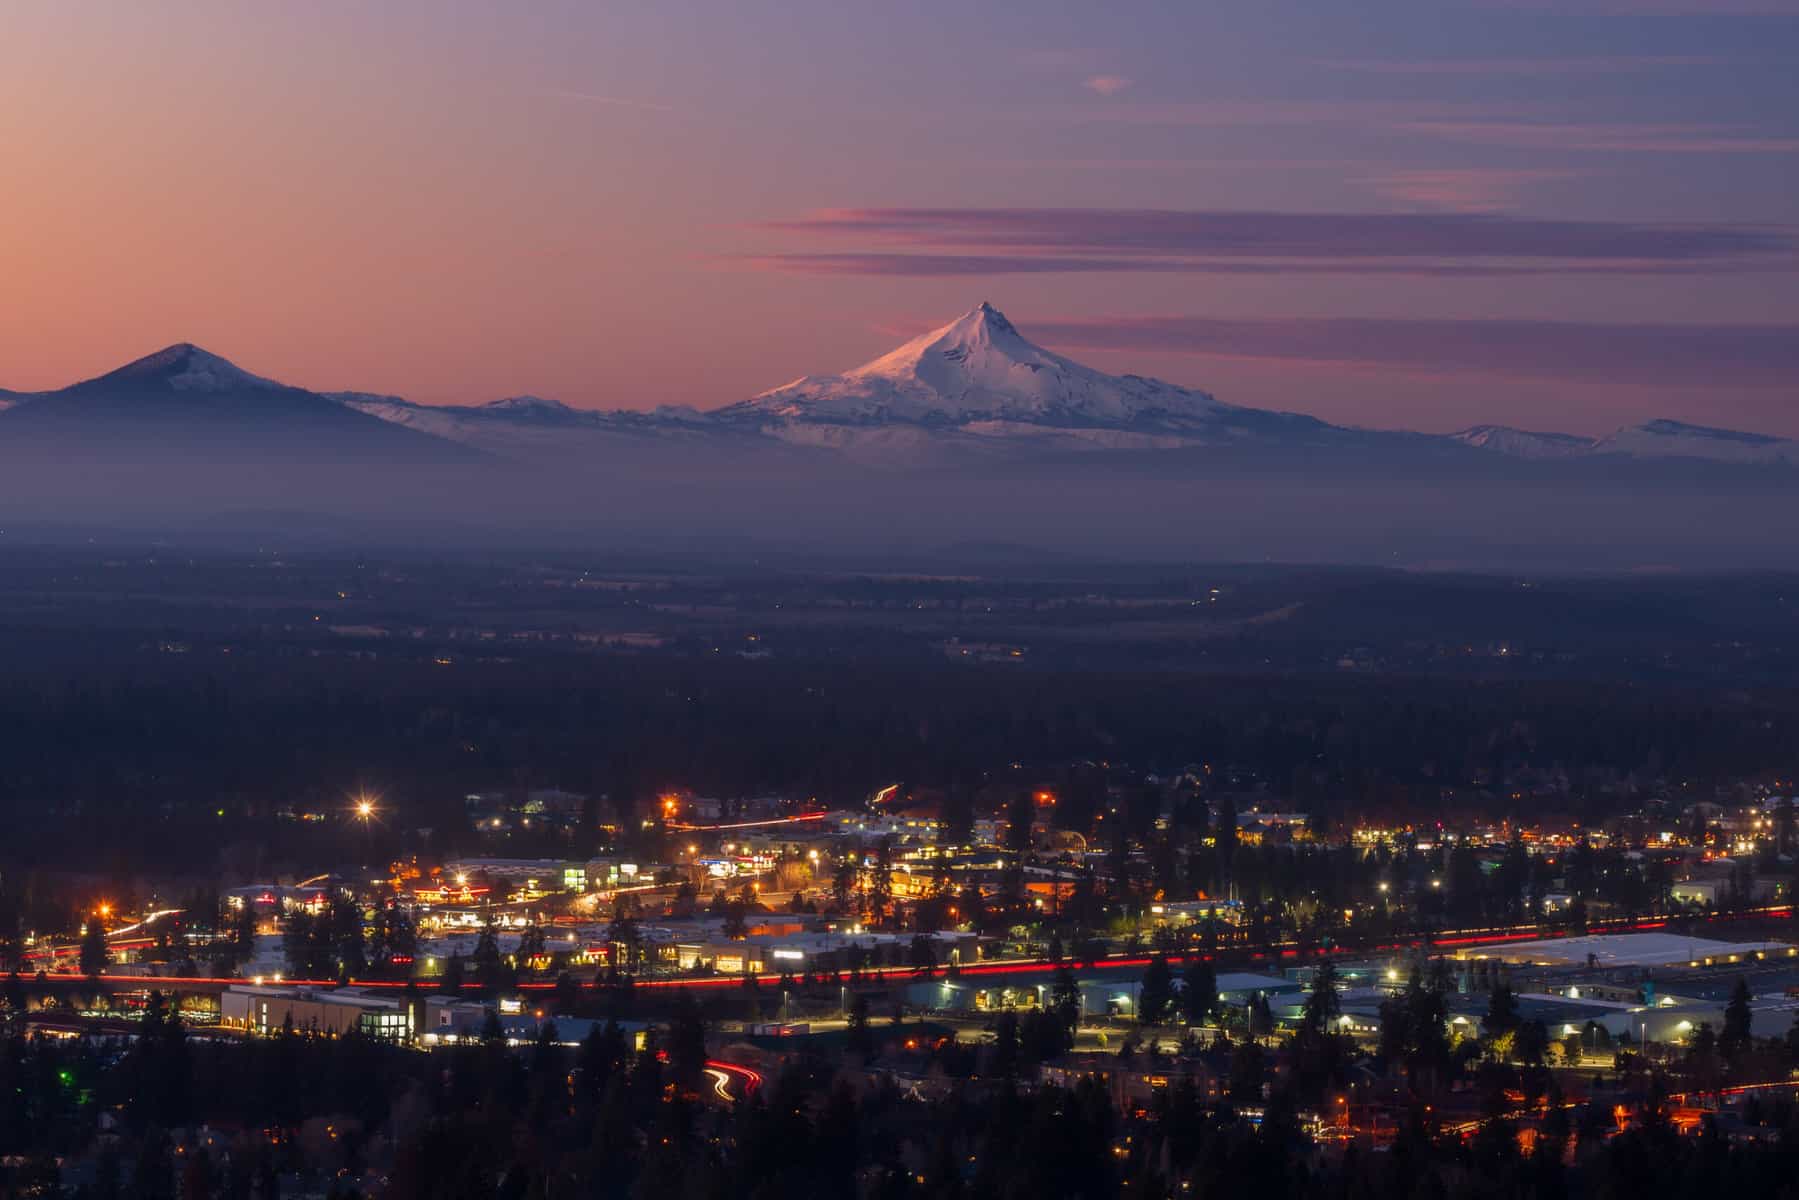 Mount Hood in the distance of Bend city lights (Image: Shutterstock)